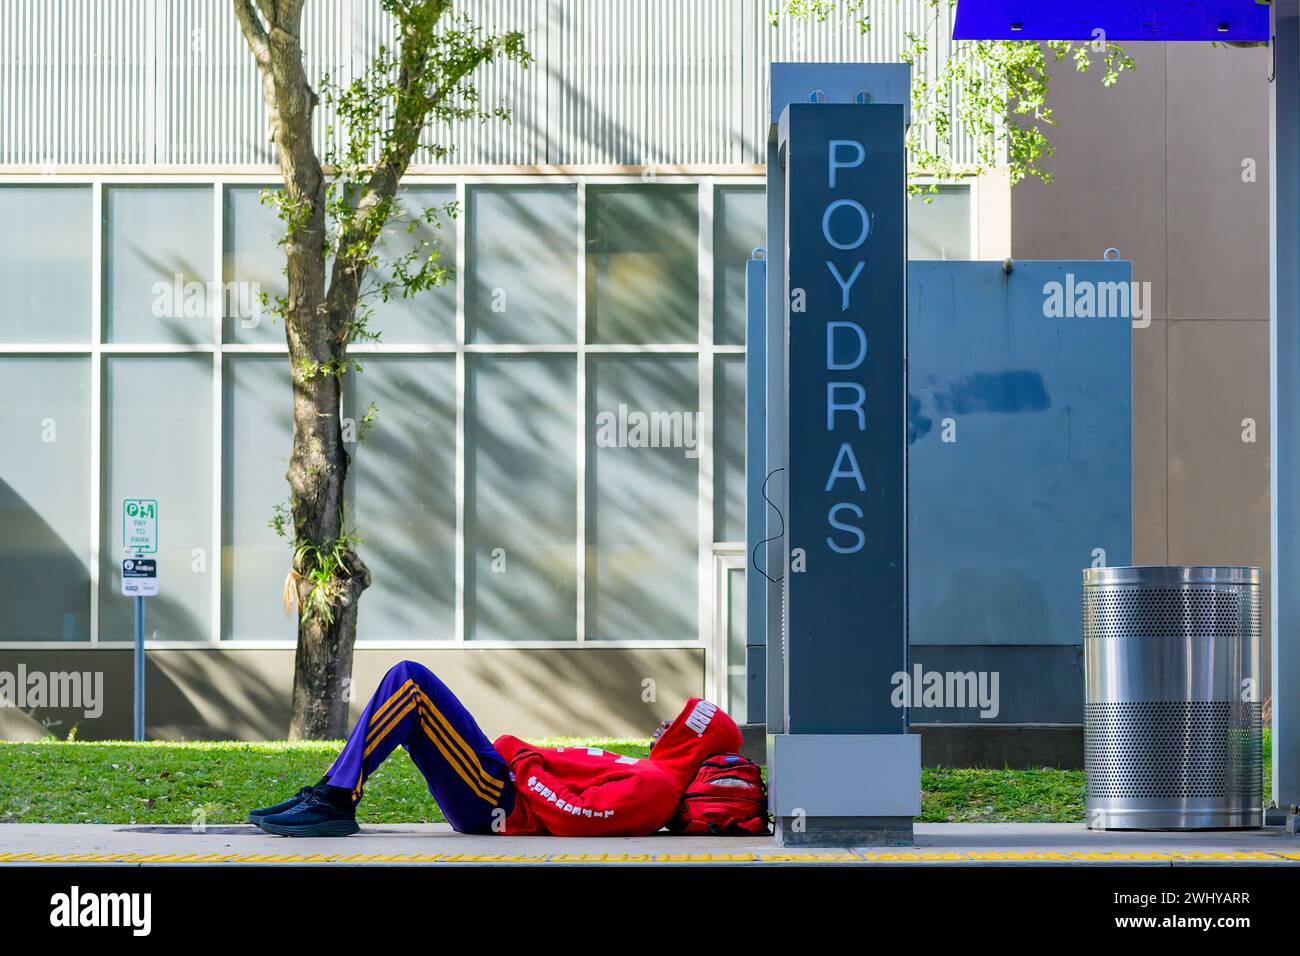 NEW ORLEANS, LA, USA - DECEMBER 31, 2023: Smartly dressed man wearing colorful athletic apparel reclining at the Poydras streetcar stop on Loyola Ave. Stock Photo